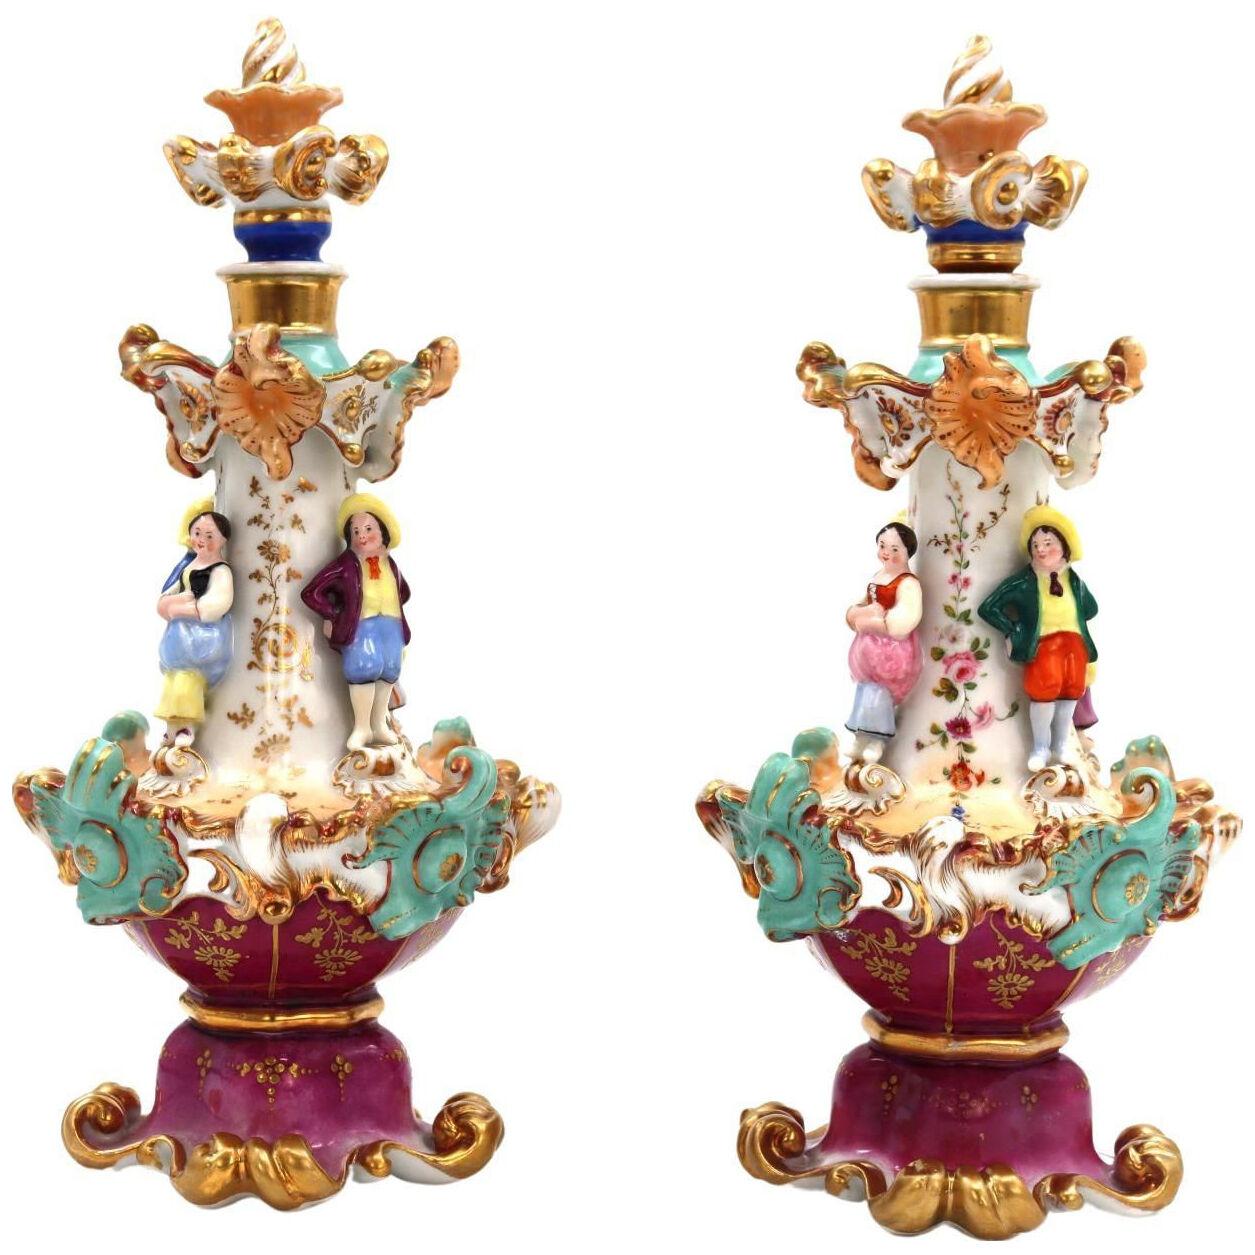 A pair of 19th century porcelain covered decanters